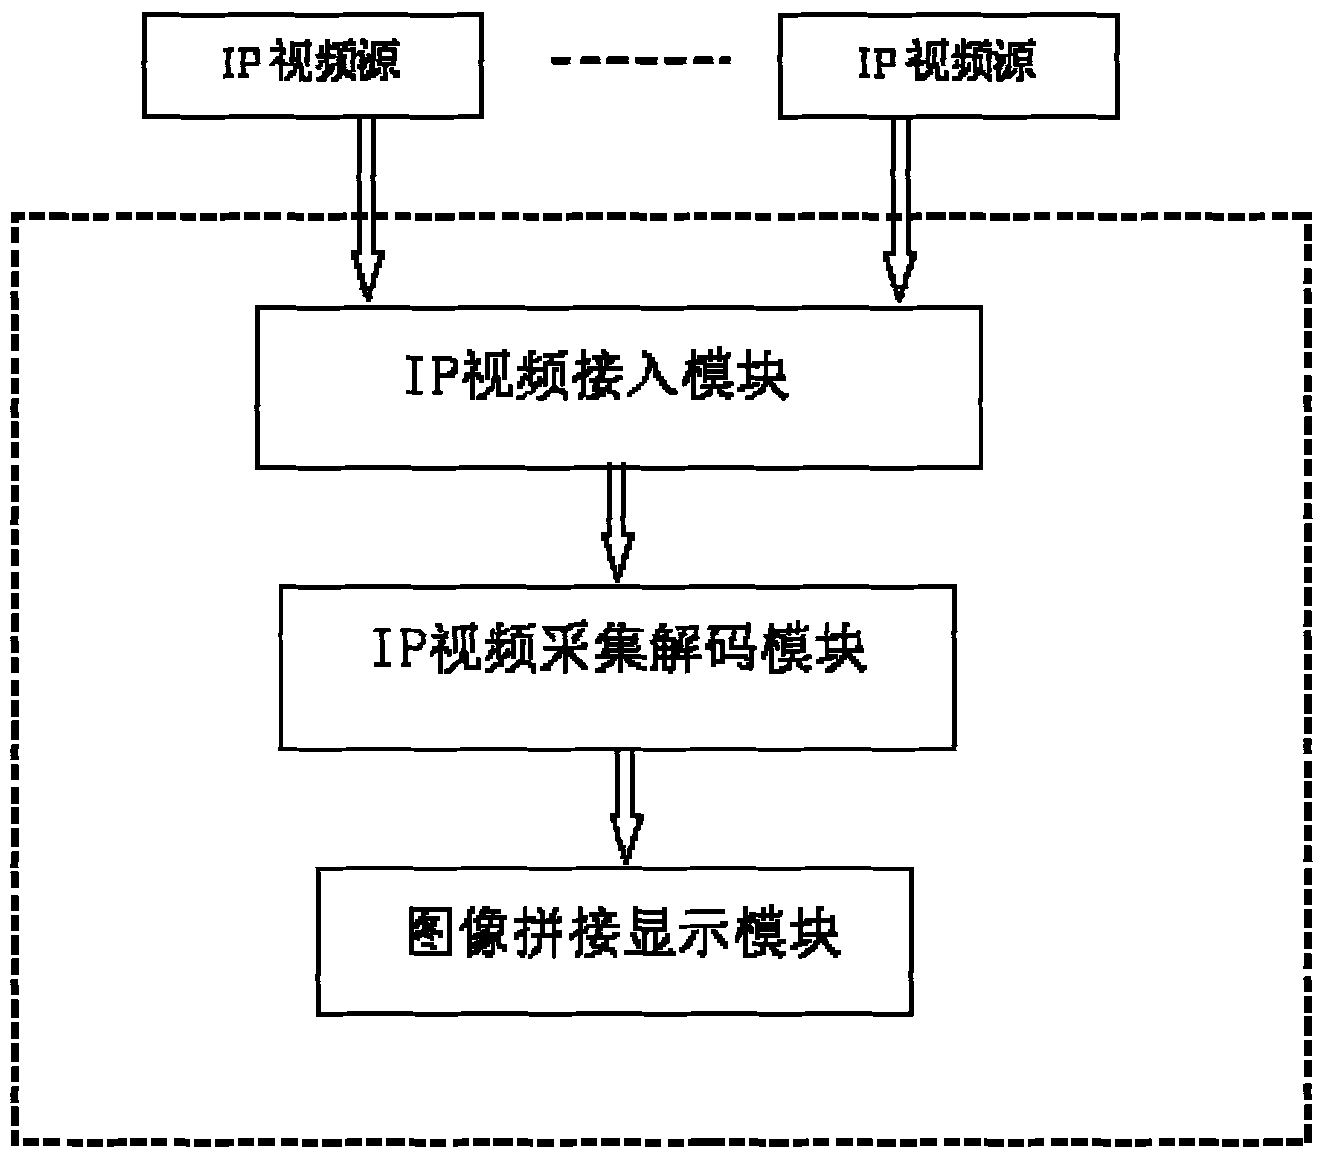 Large screen IP (Internet Protocol) video stream access equipment and implementation method thereof